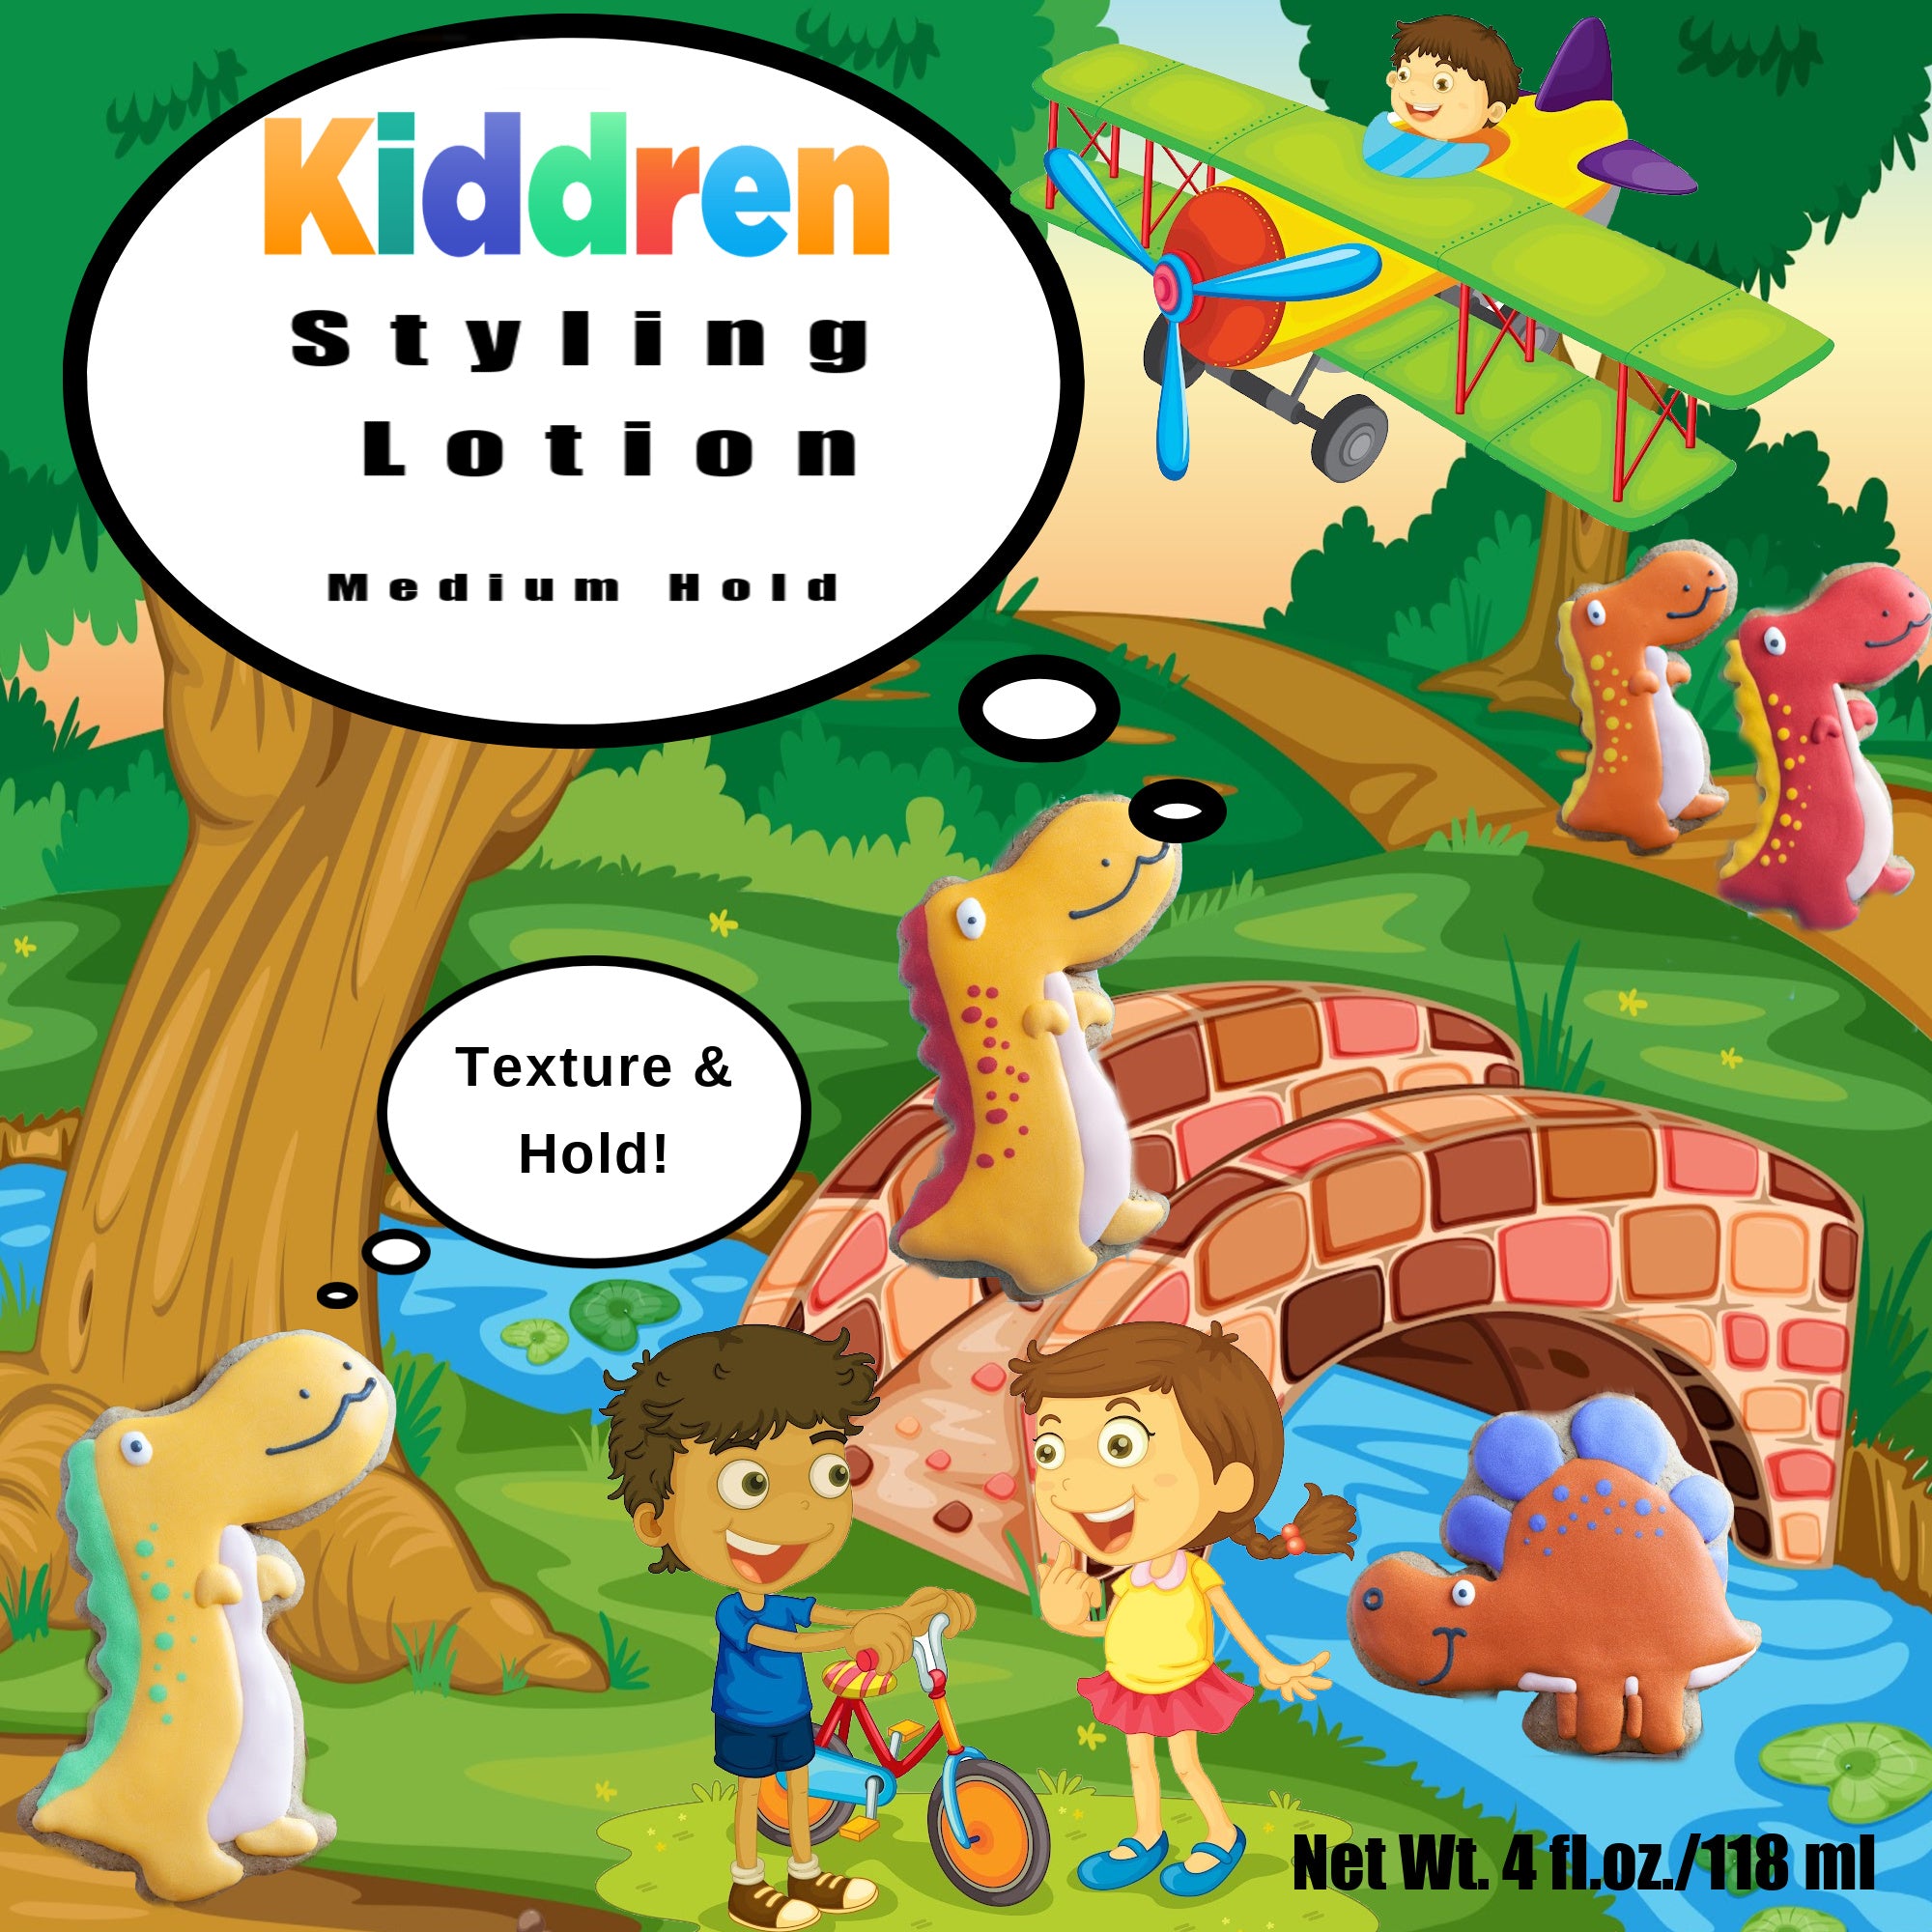 Kiddren Styling Lotion 4 ounce hair styling lotion for kids provides light to medium hold and alternative hair styles